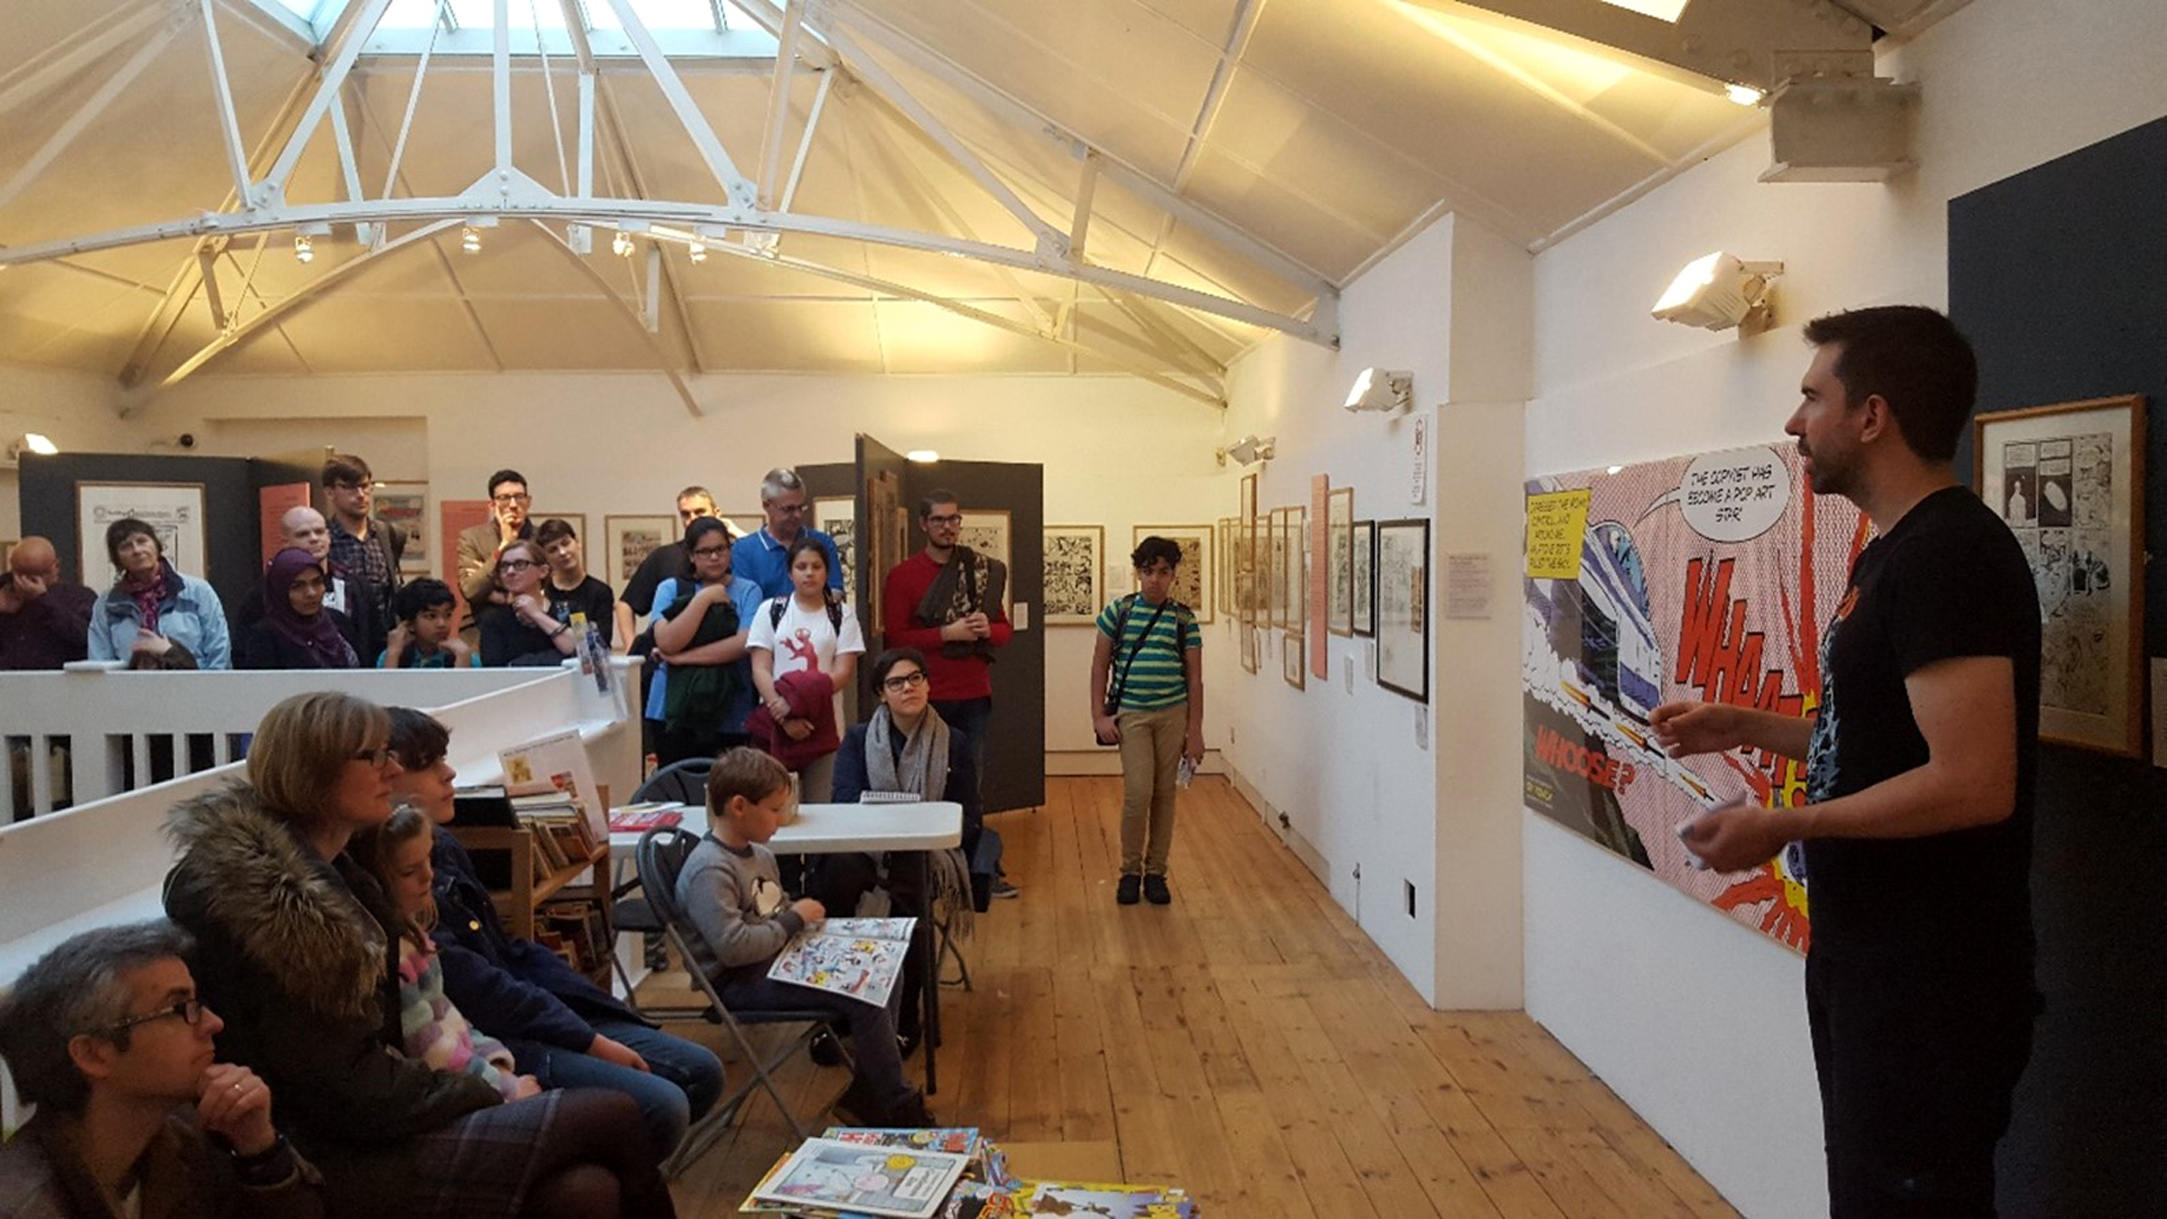 Comic book artist leading an event at the Cartoon Museum